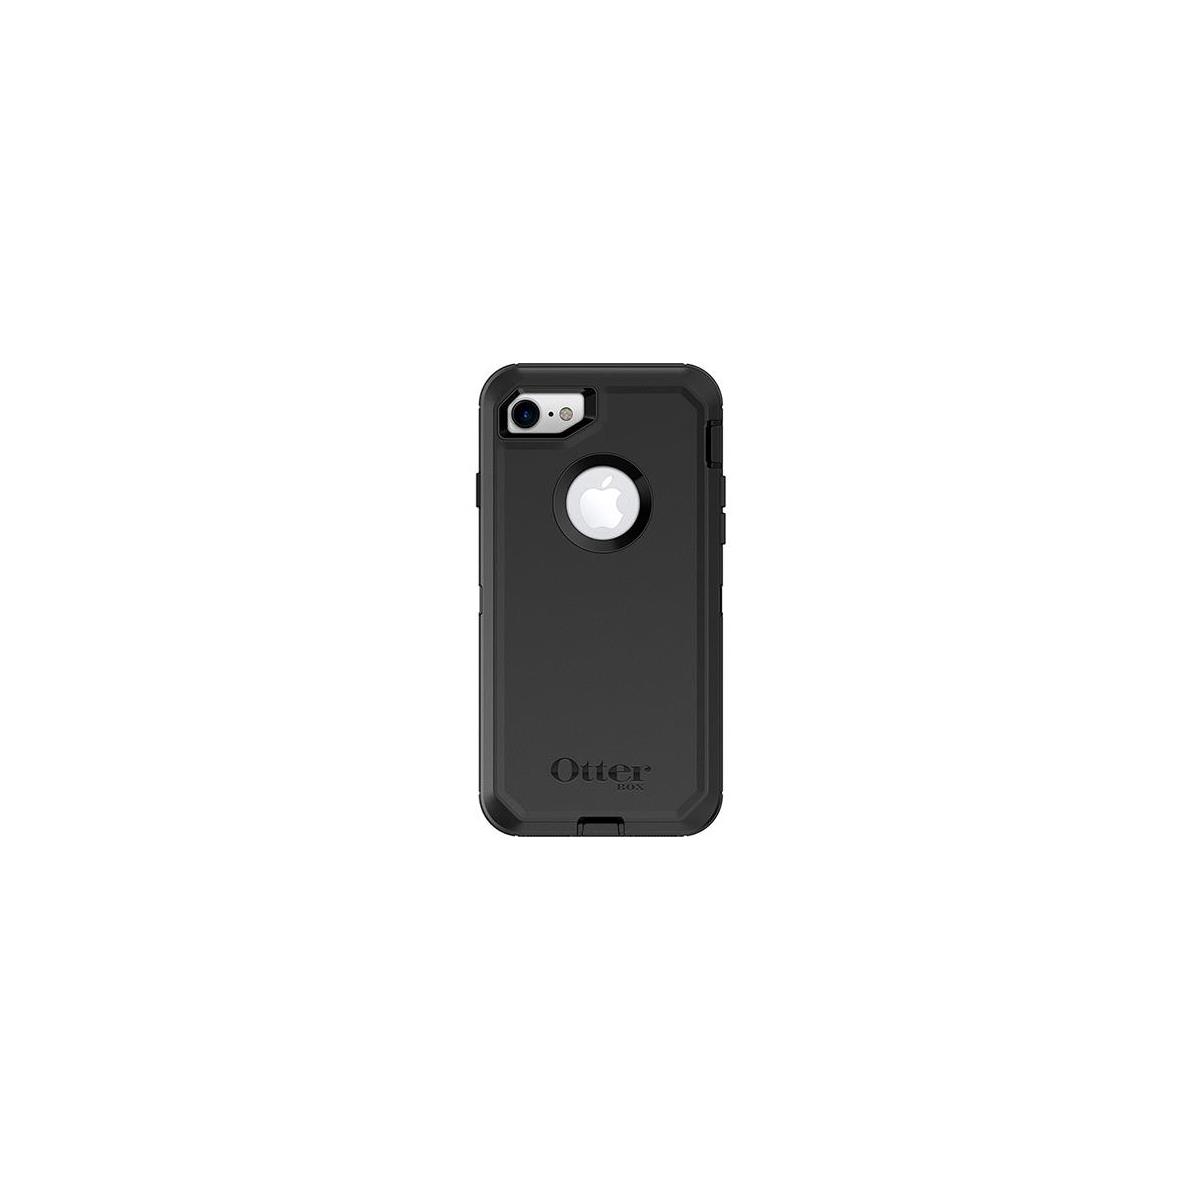 Image of OtterBox Defender Case for iPhone 7/ iPhone 8 - Black